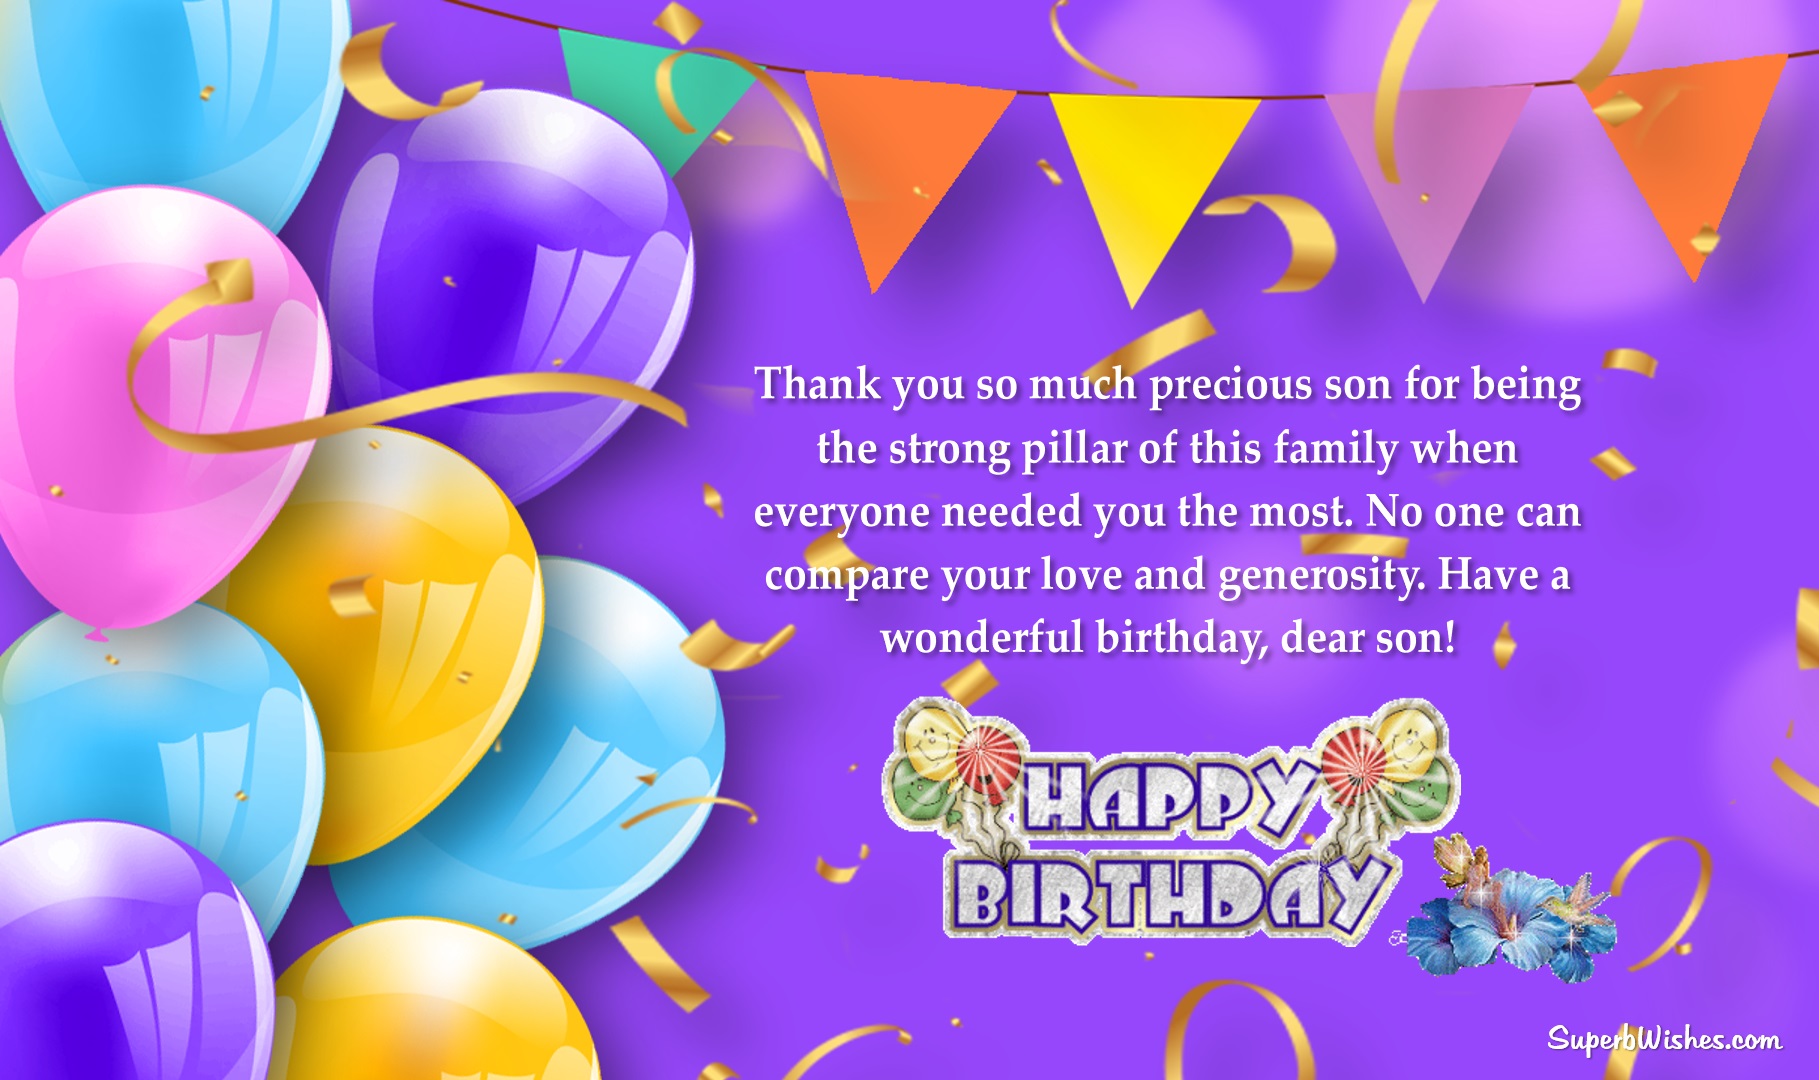 Happy Birthday Wishes For Son Images | Birthday Greetings | SuperbWishes